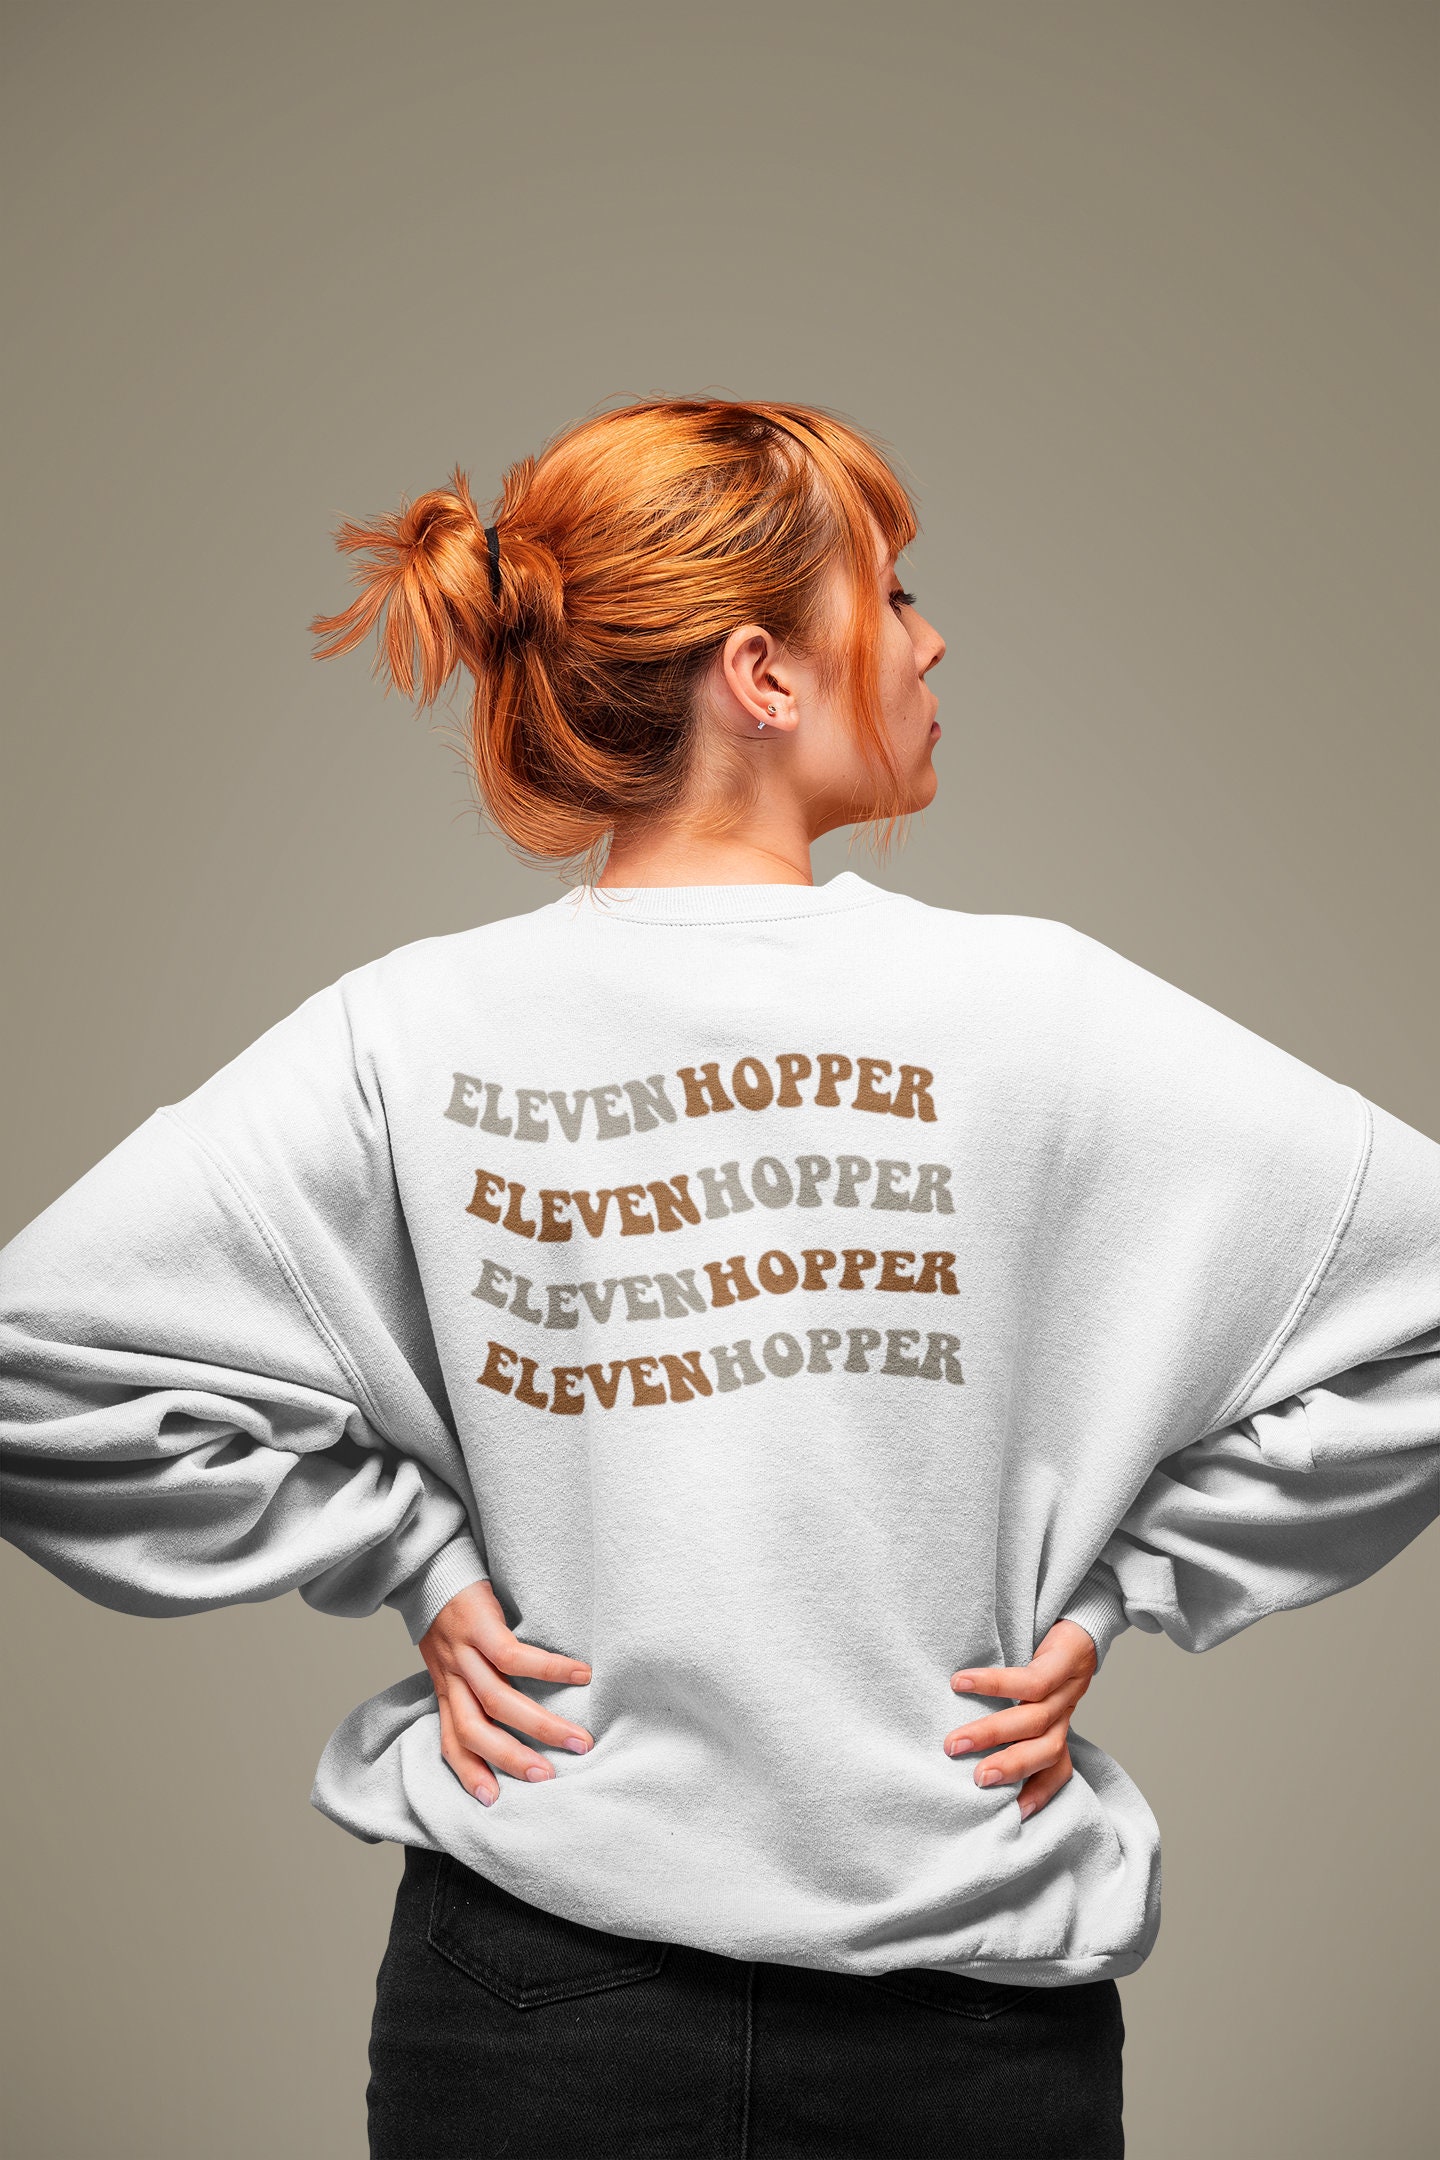 Eleven Stranger Things Classic T-Shirt for Sale by BluePinkArtie